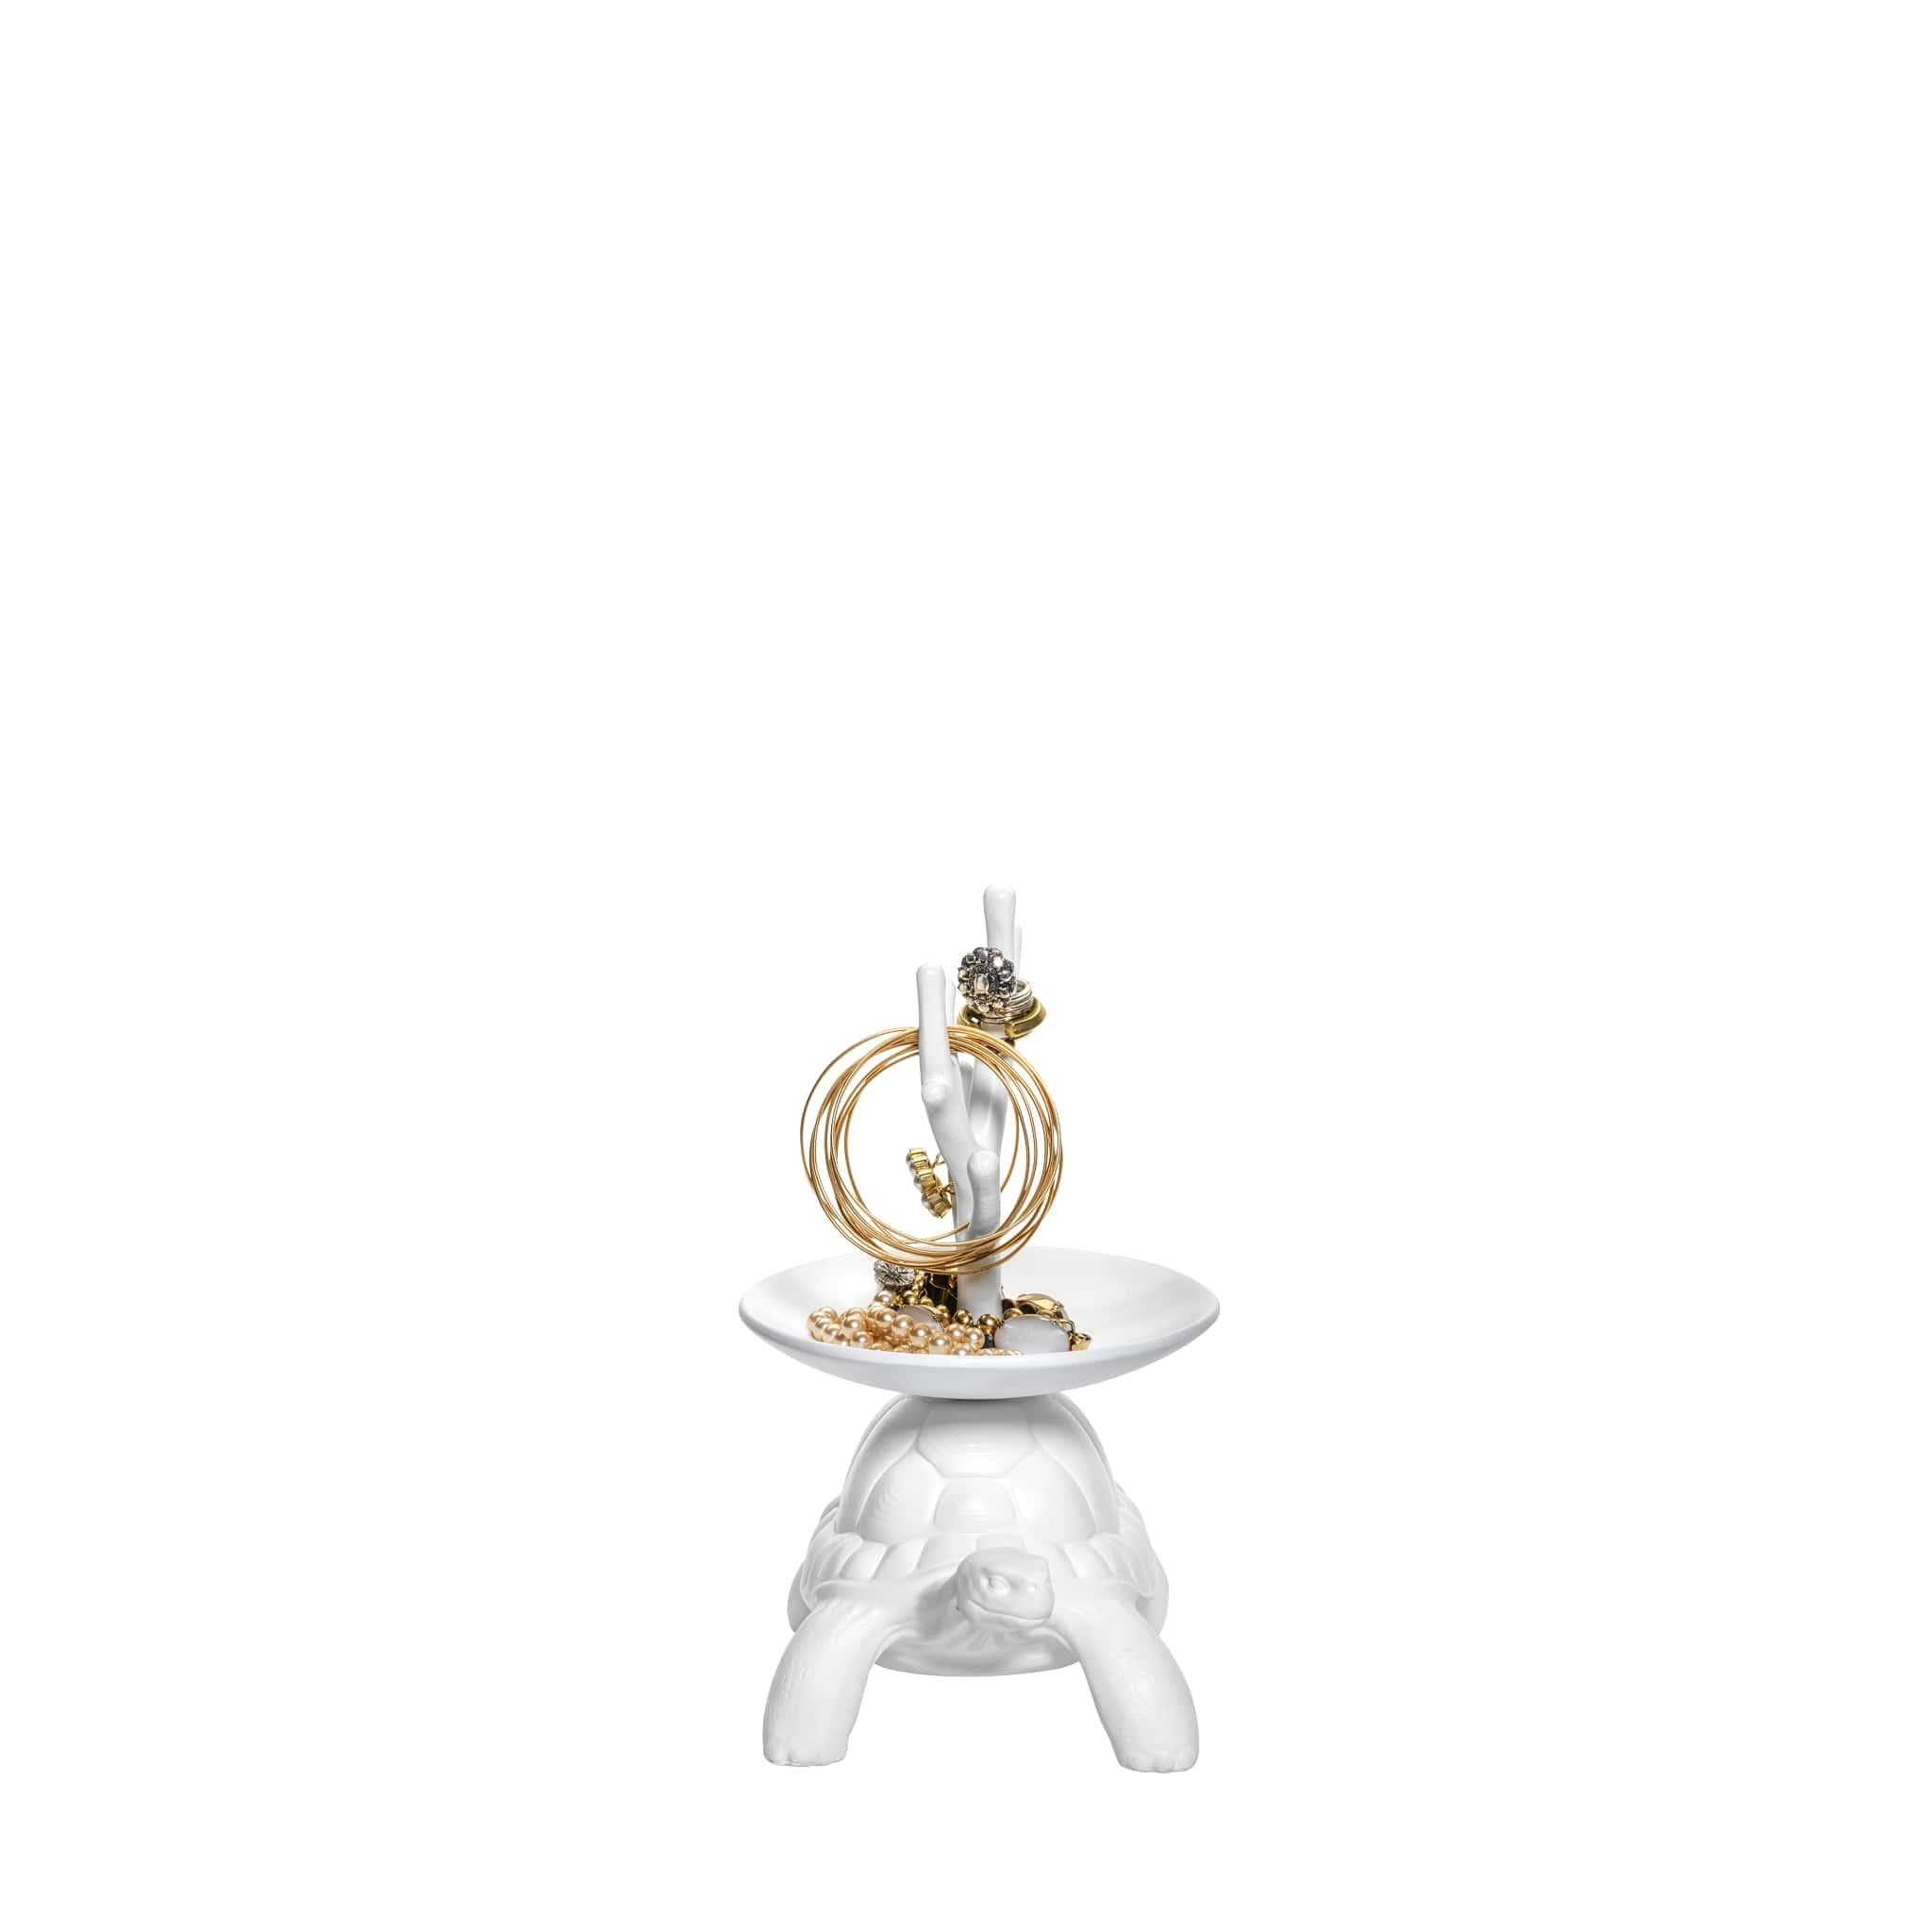 After the success of Turtle Carry, Marcantonio presents the iconic turtles in a small version.
The turtle carapace supports a jewelry tree.

Produced in white opaque resin, they catch the attention and they fit perfectly into any corner of the